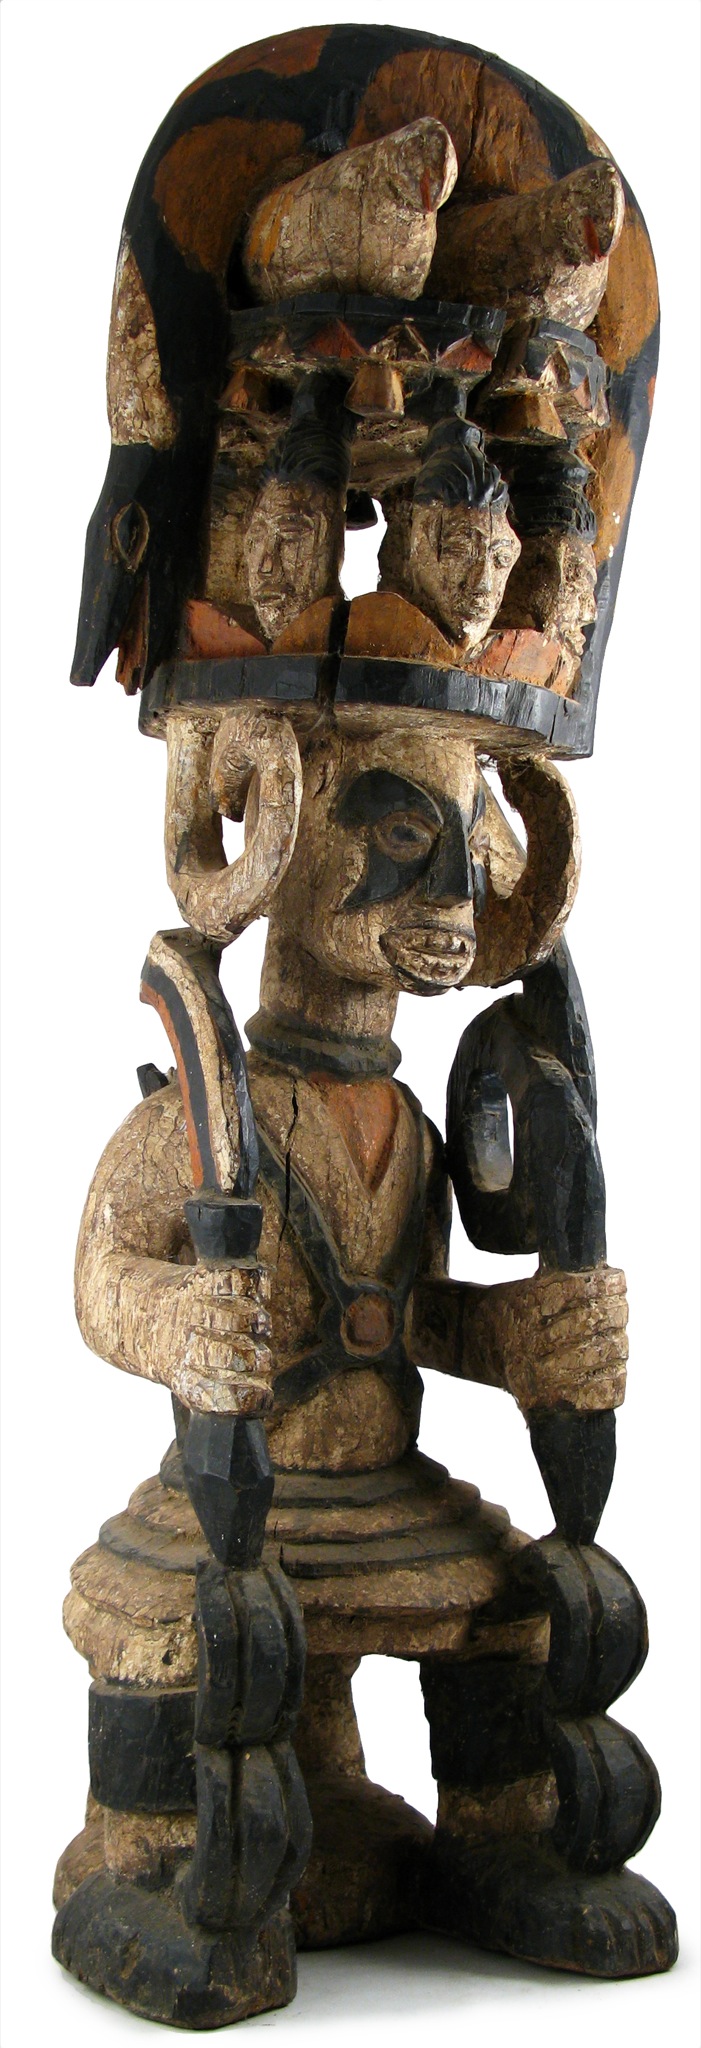 a piece of wood sculpture, with various items in it